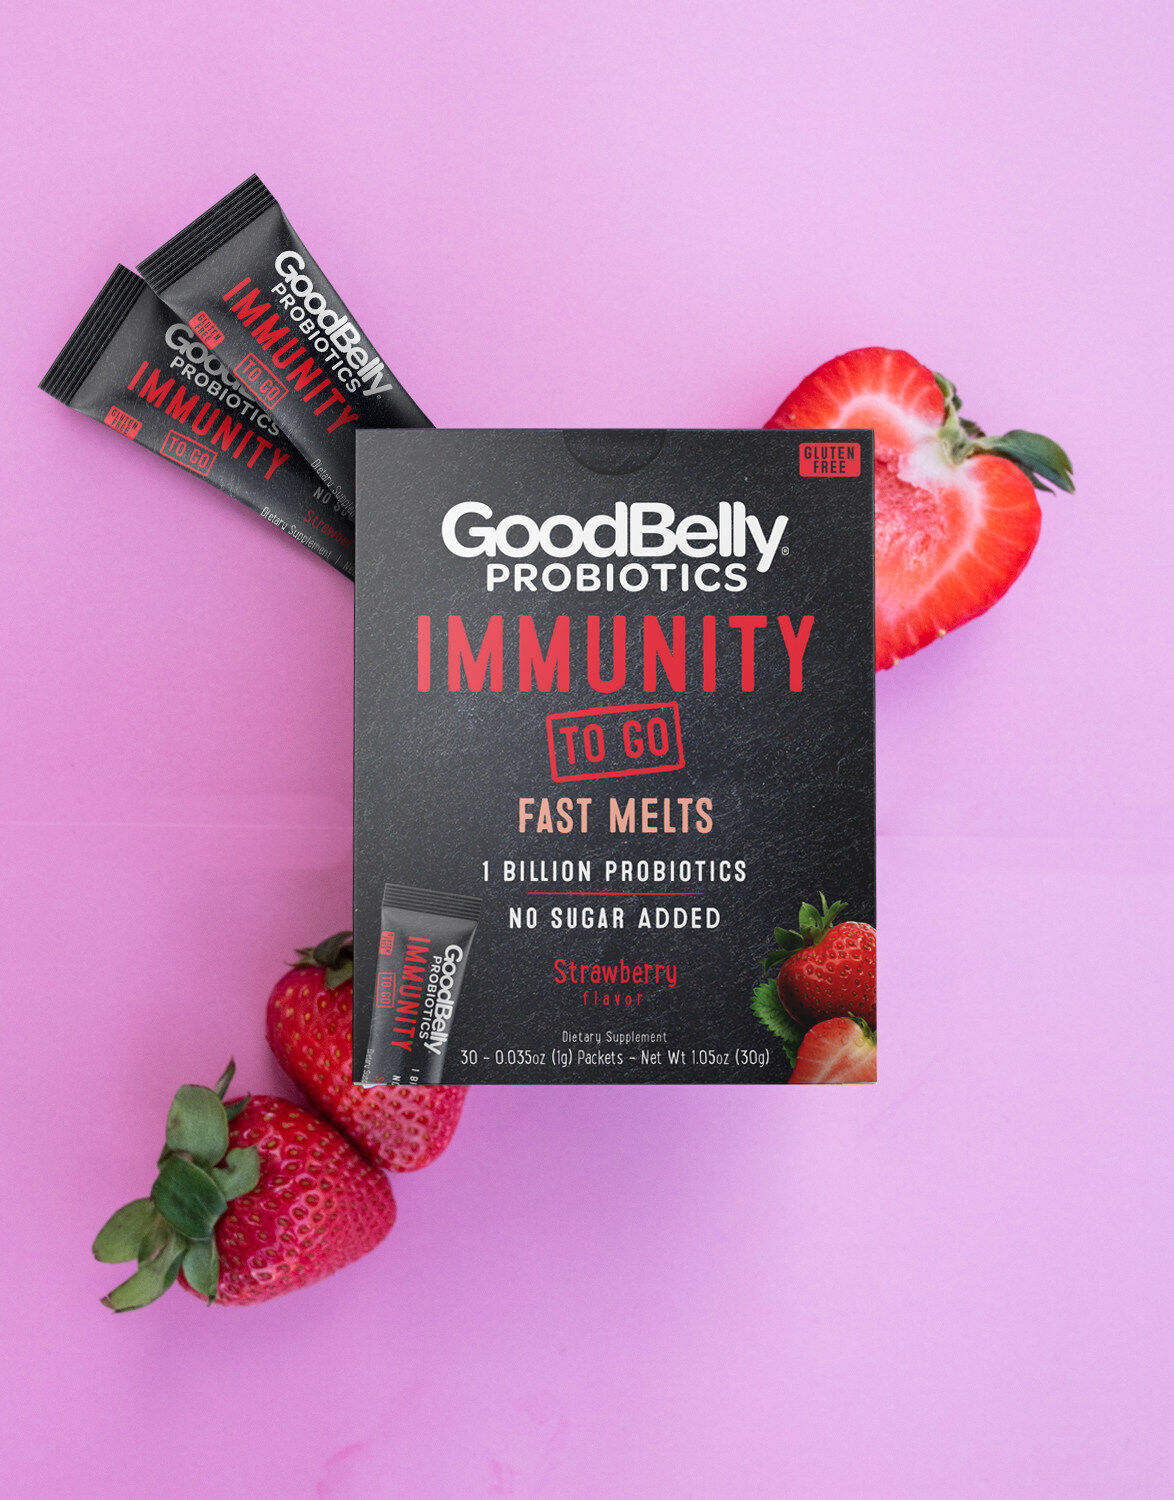 GoodBelly Launches Fast Melts Perfect for On-the-Go Immune System and Digestion Support